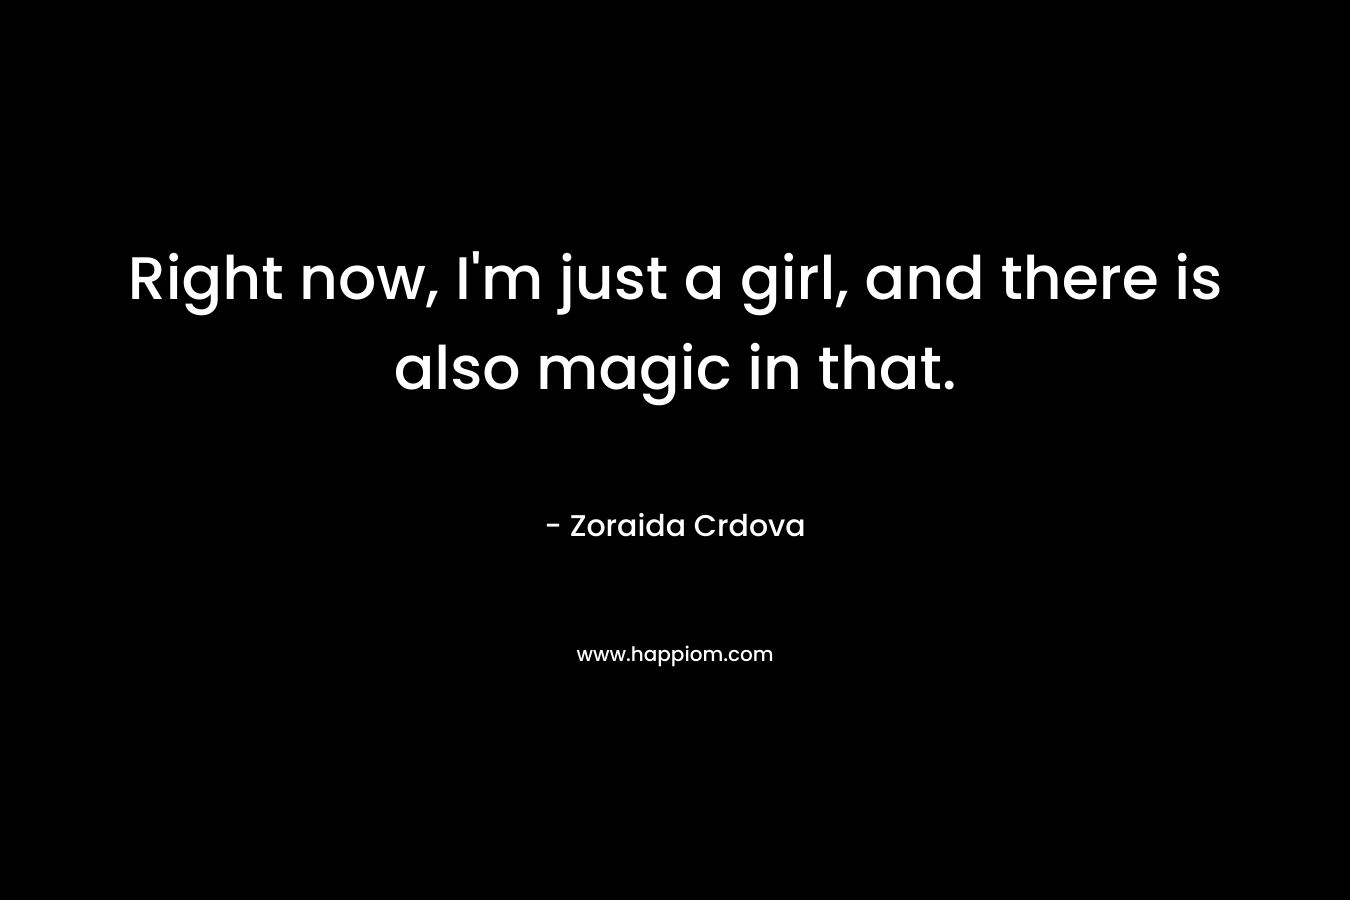 Right now, I'm just a girl, and there is also magic in that.